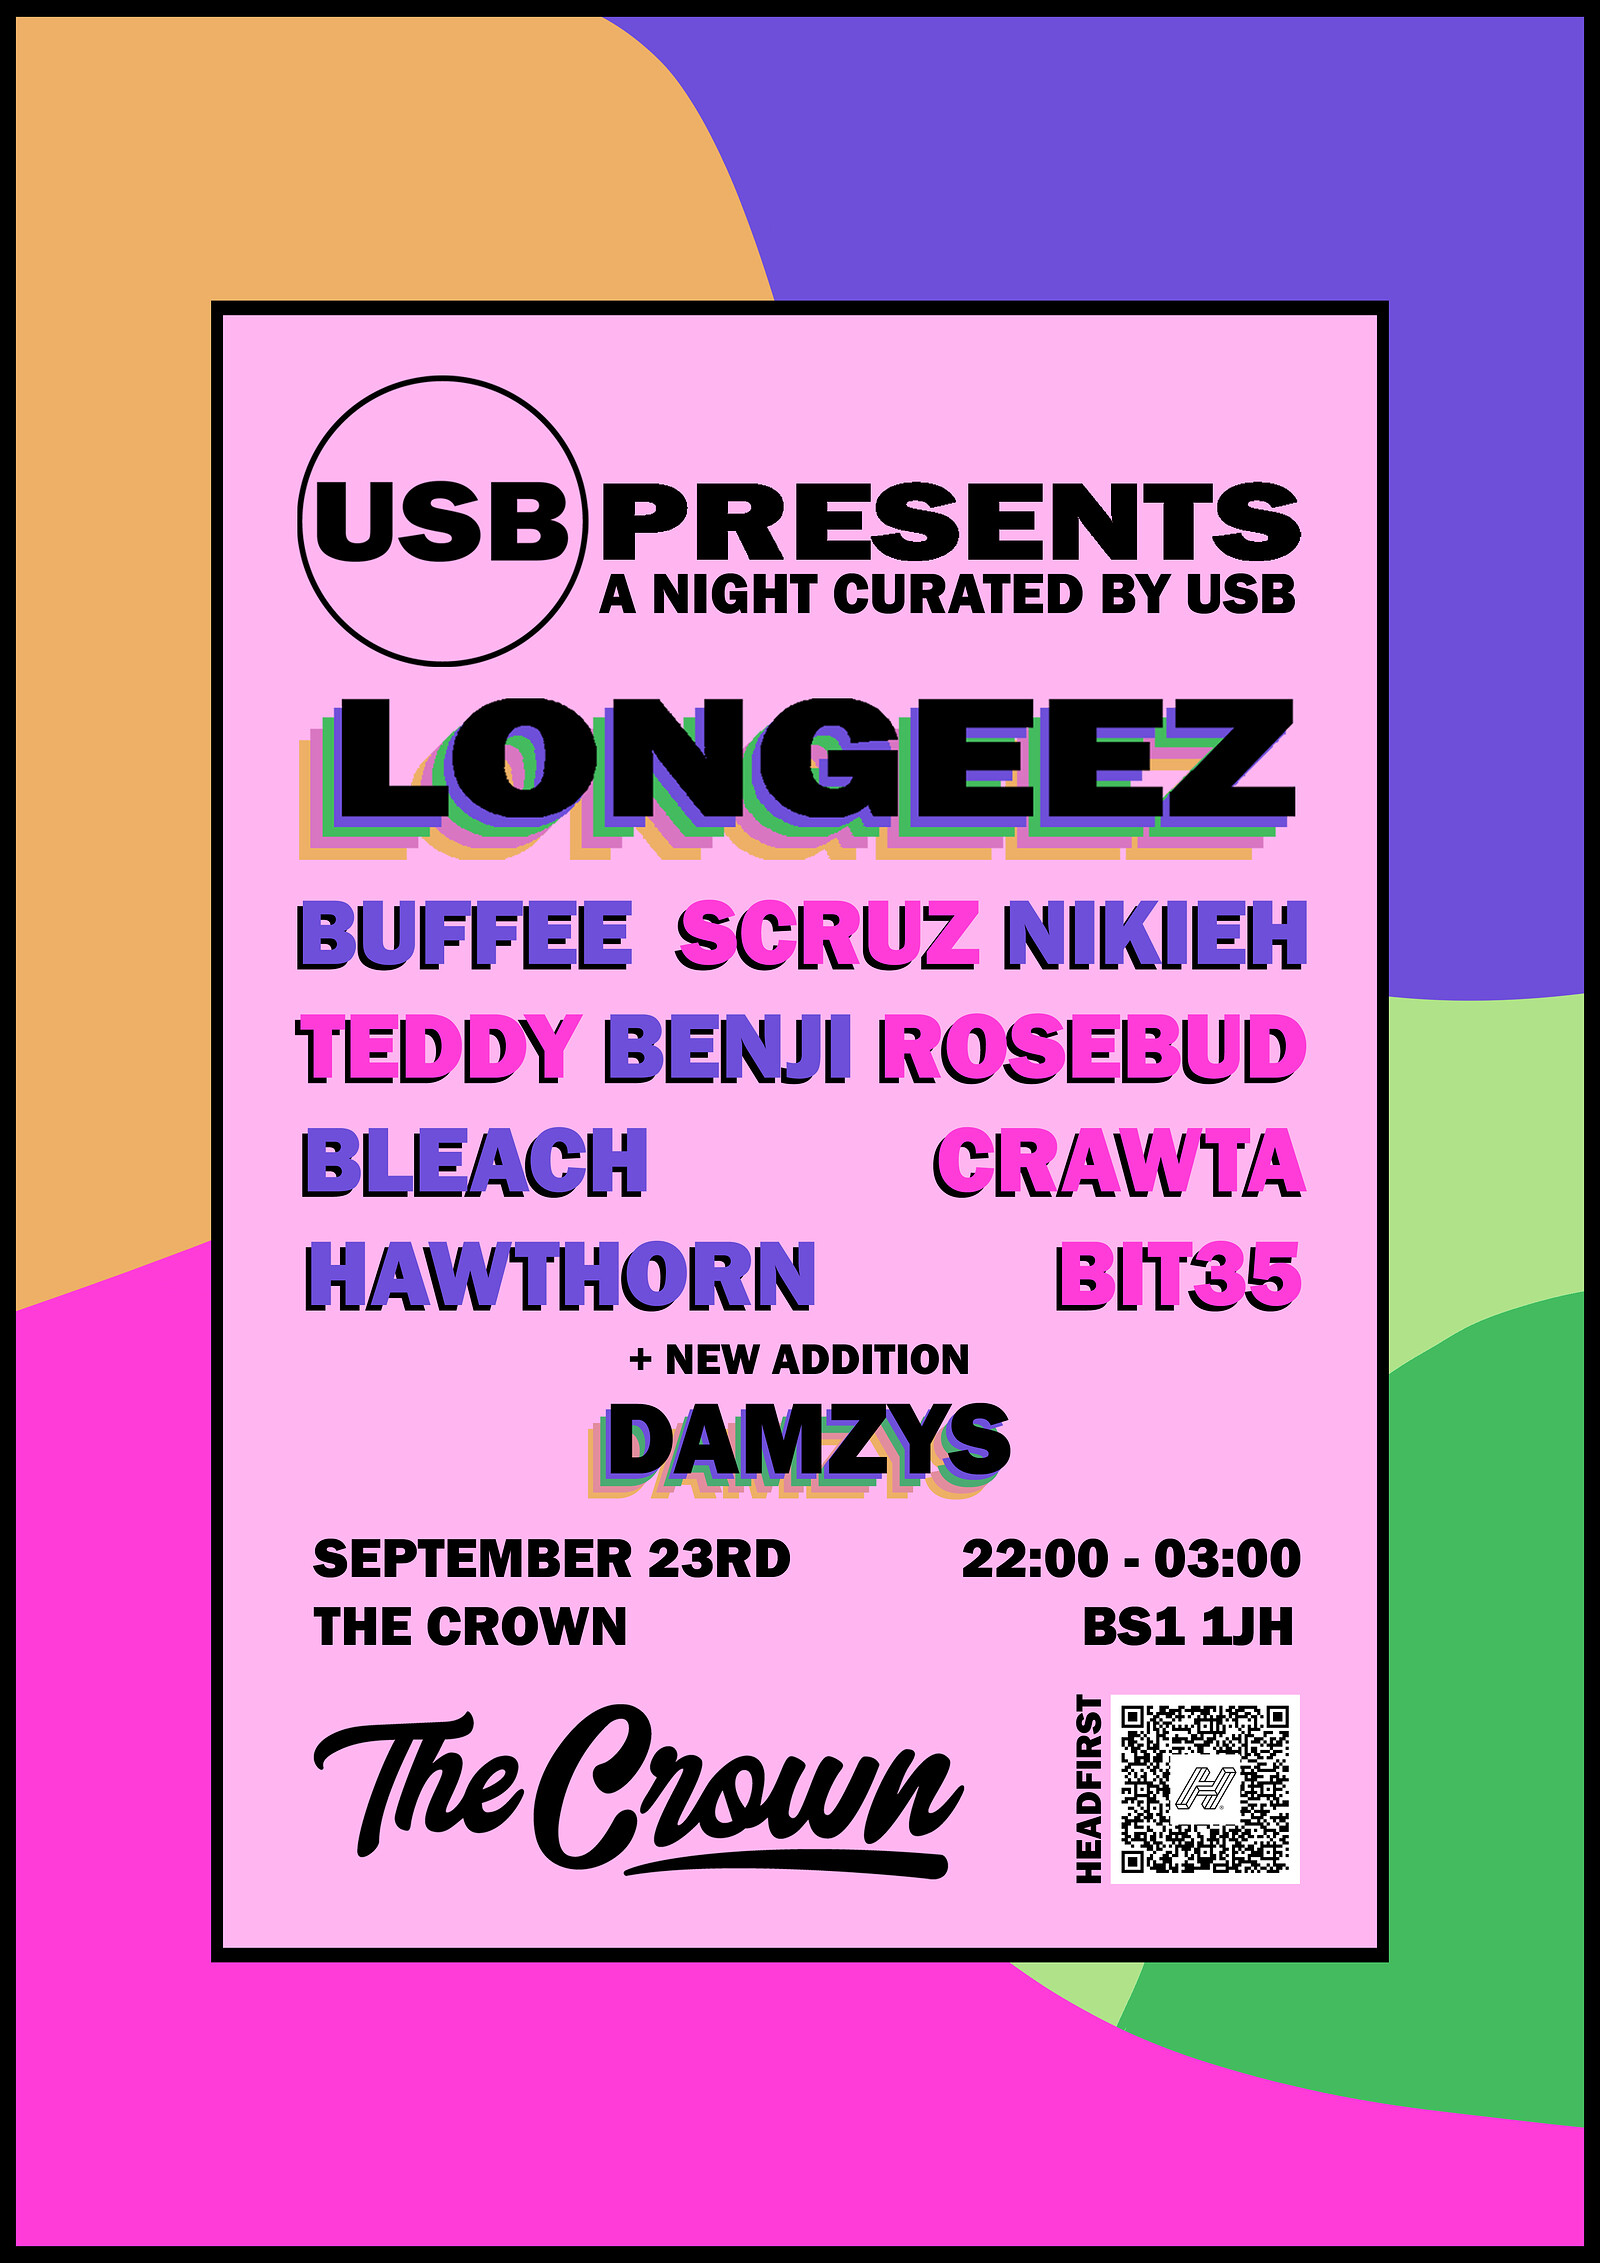 USB Presents: Longeez at The Crown